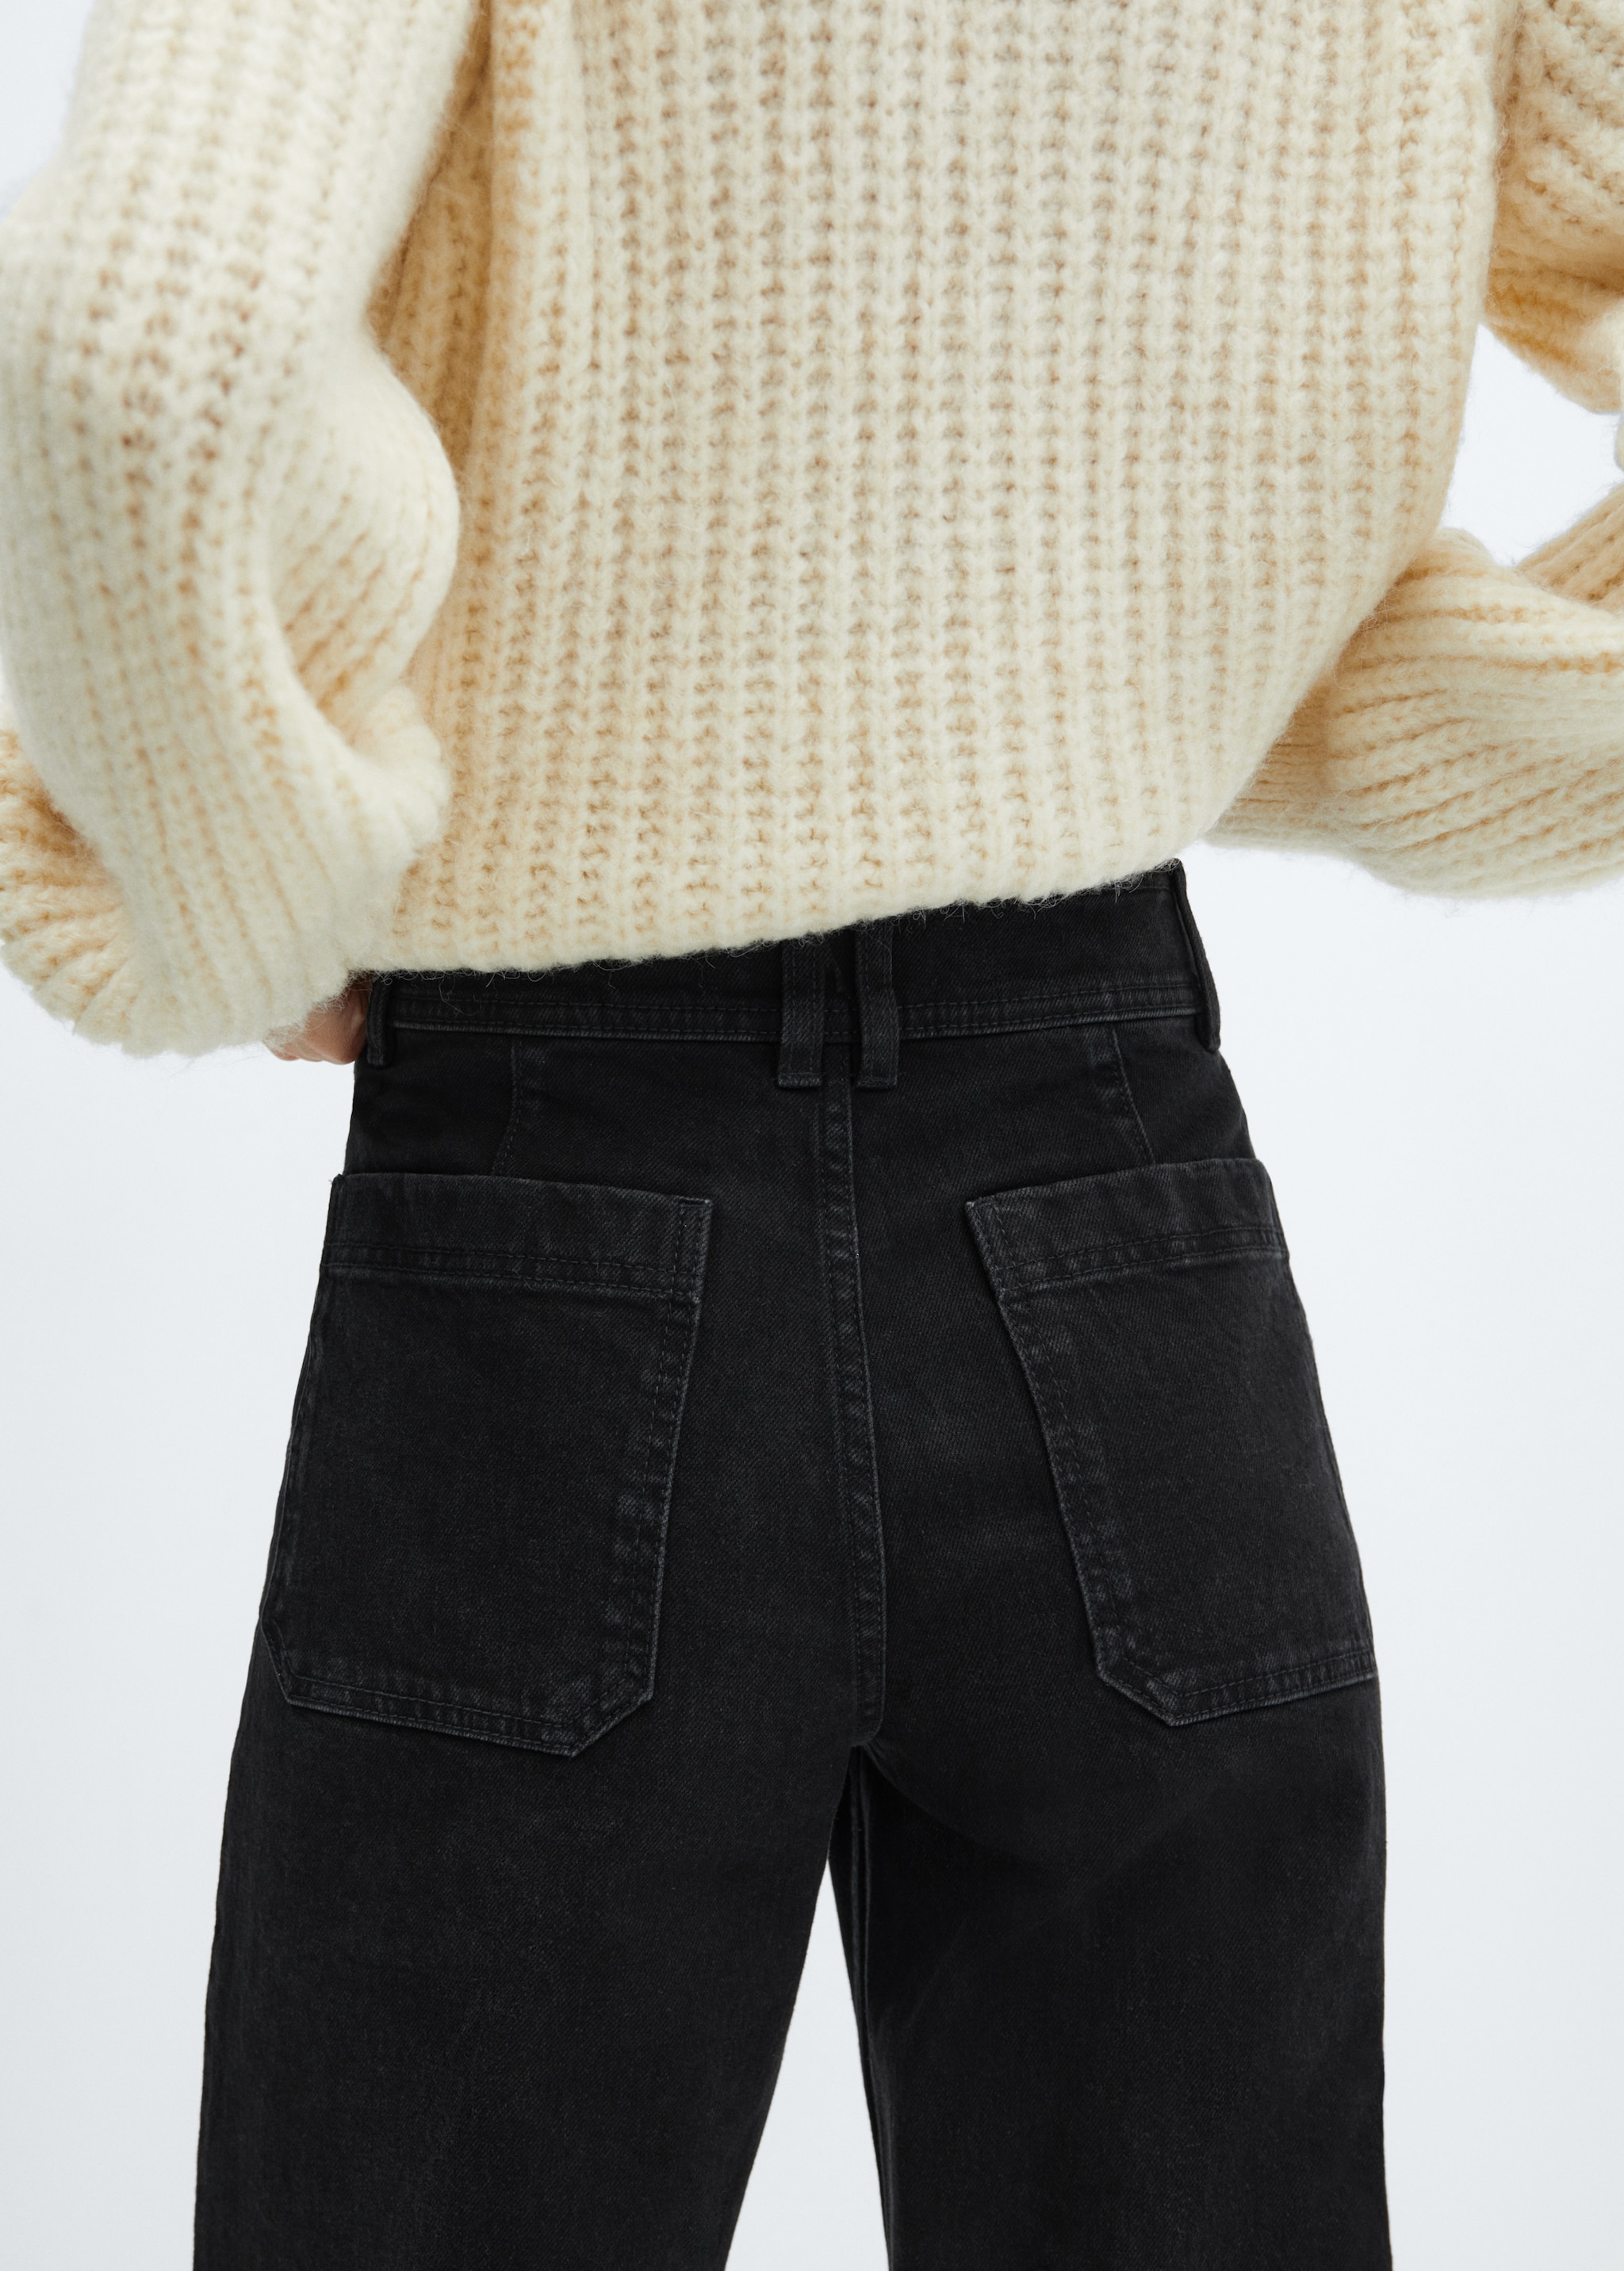 Catherin culotte high rise jeans - Details of the article 4